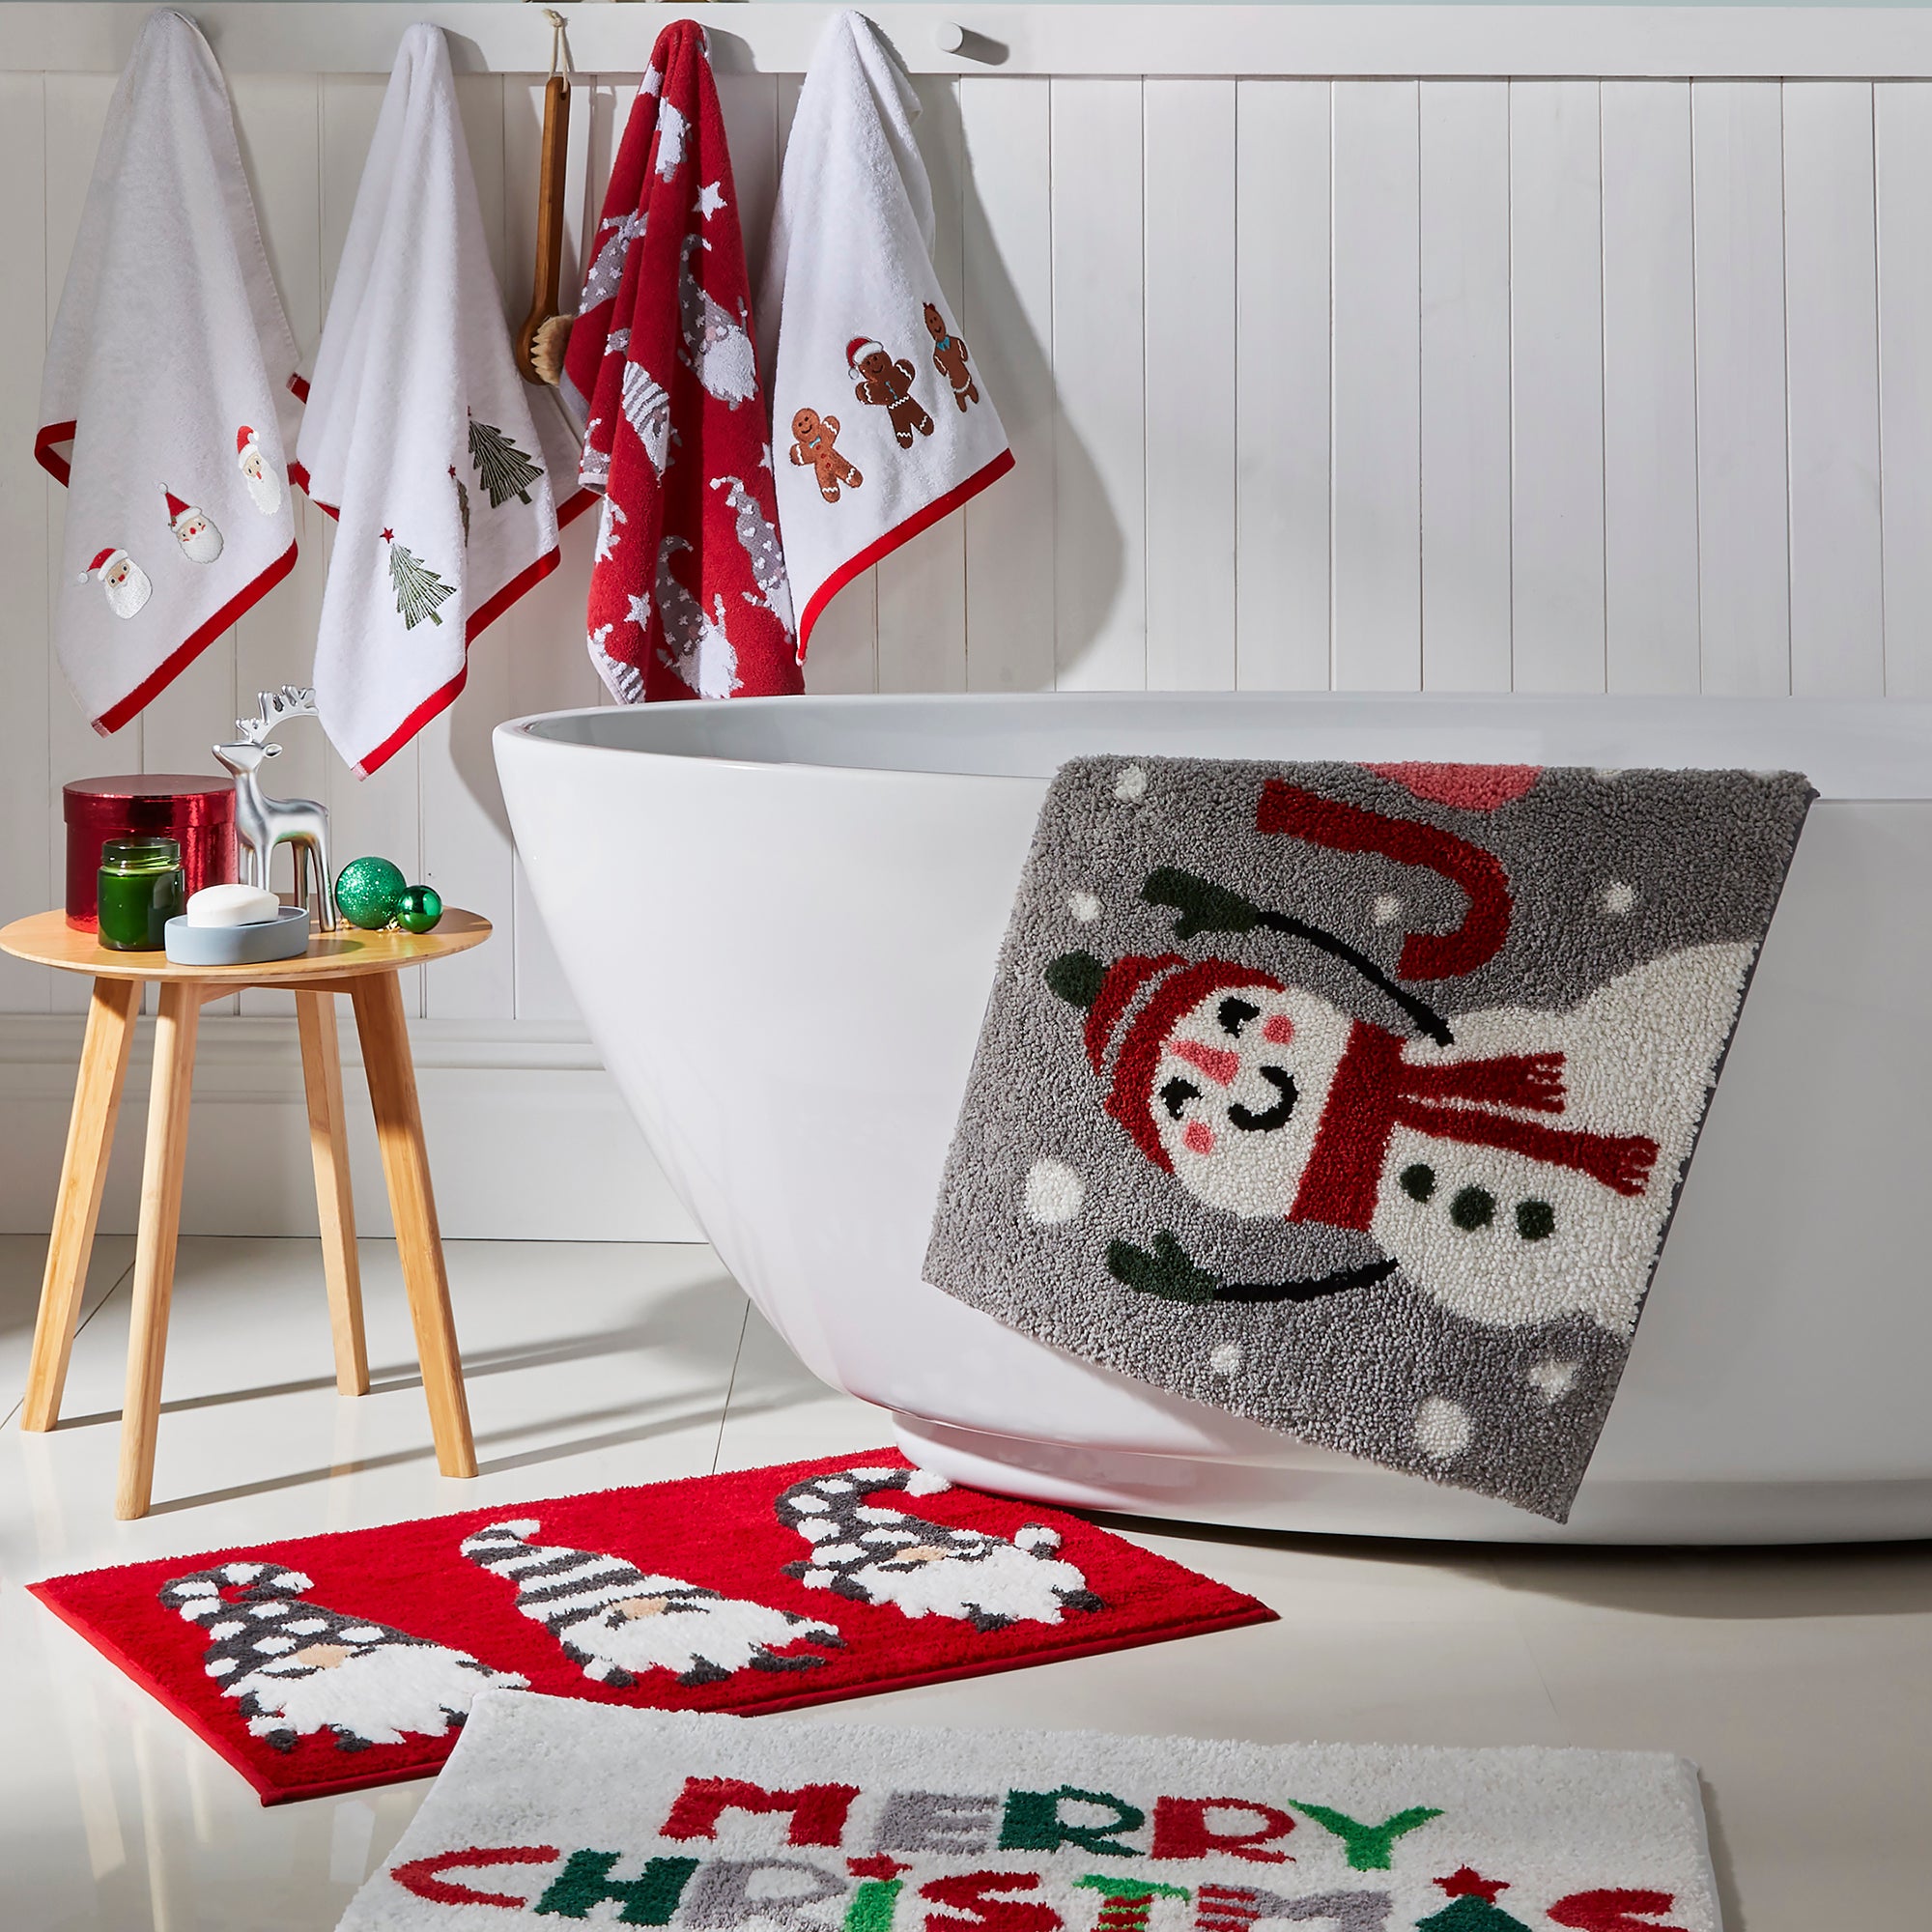 Hand Towel (2 pack) Santa by Fusion Christmas in White